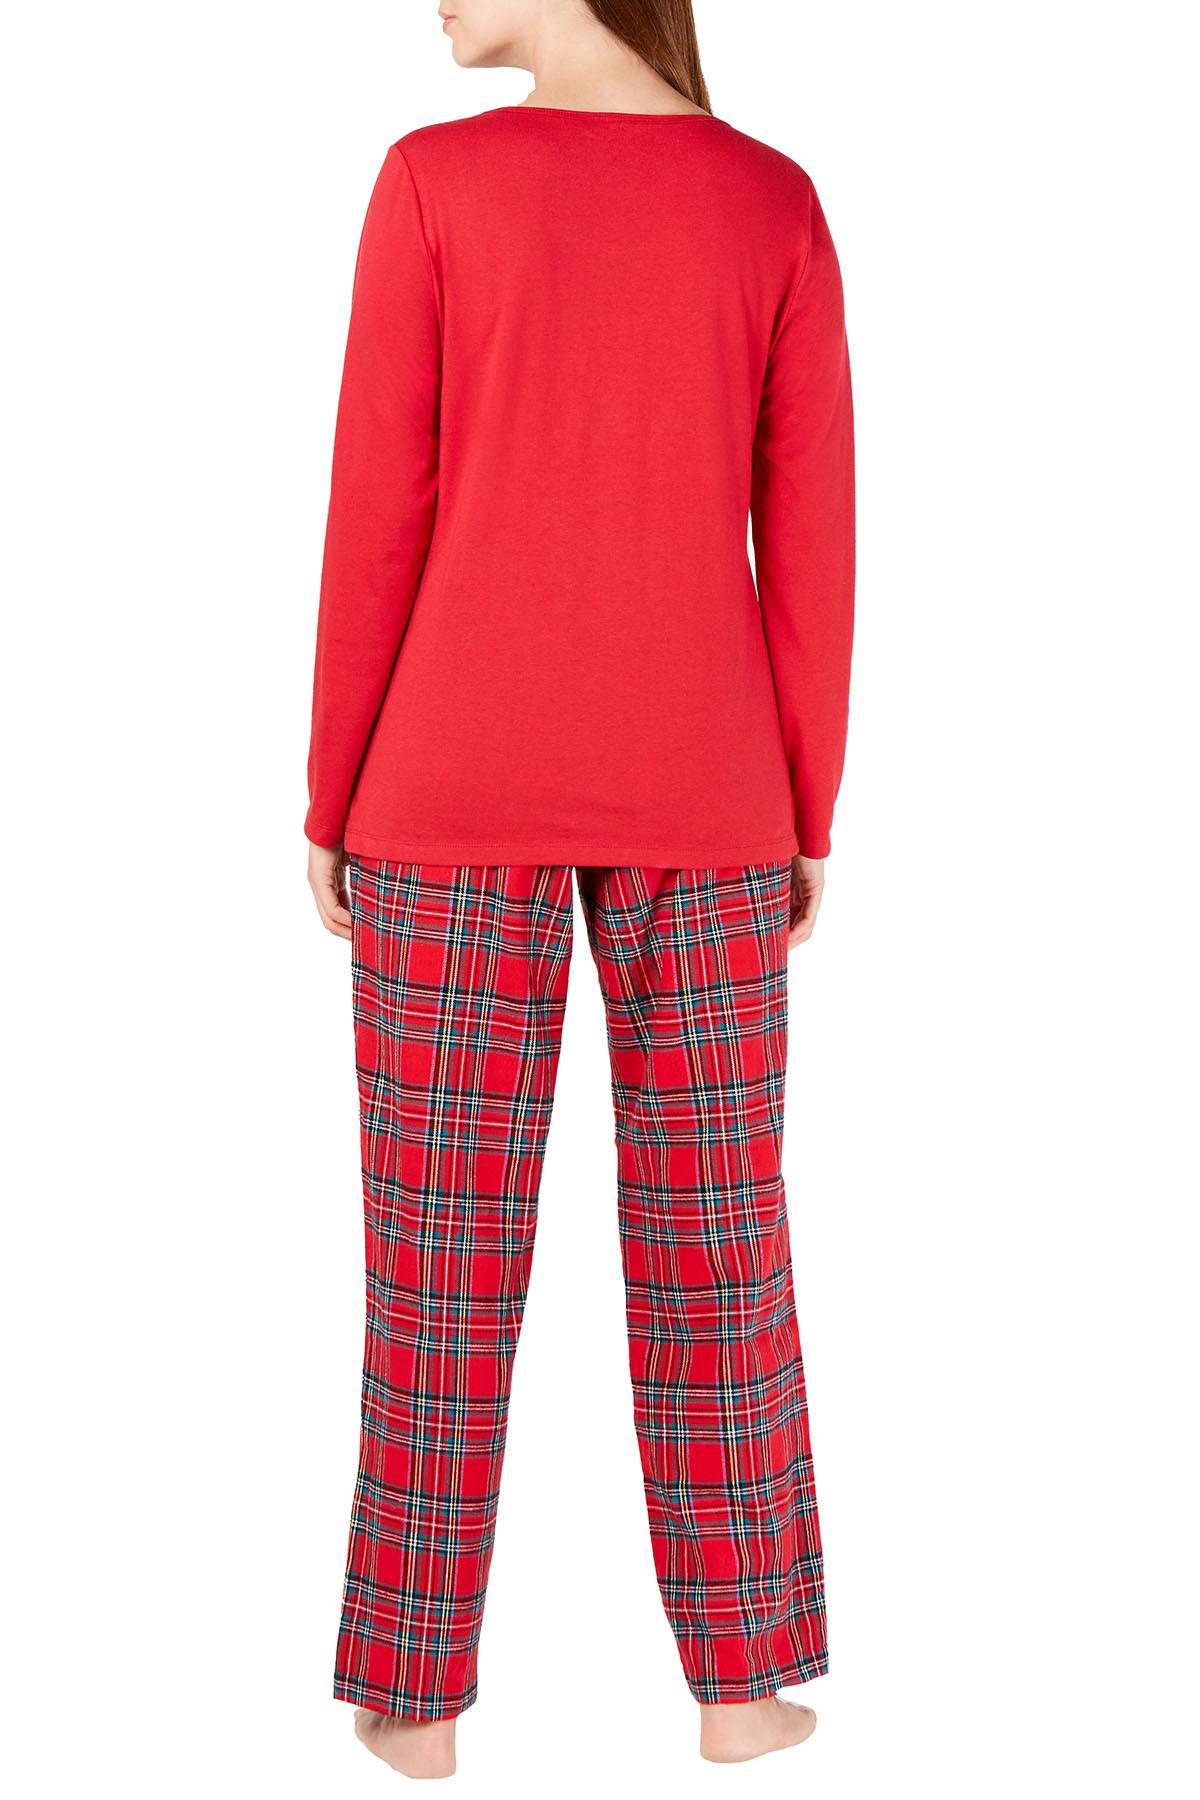 Family PJs Women's Holiday Mix It Pajama Set in Brinkley Plaid